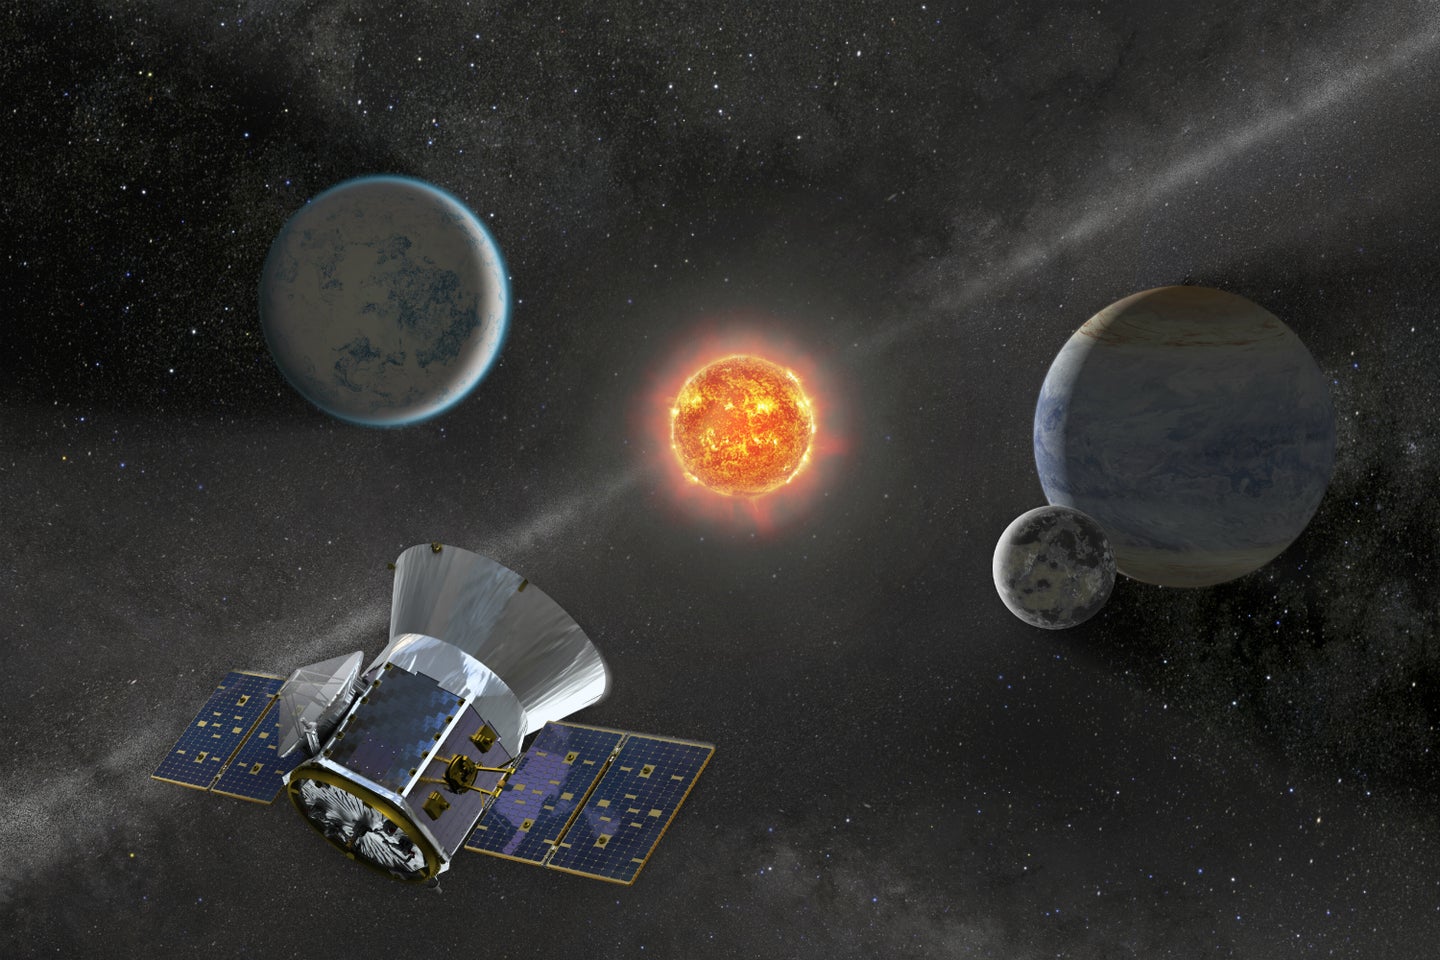 The Transiting Exoplanet Survey Satellite, in an artist's illustration.